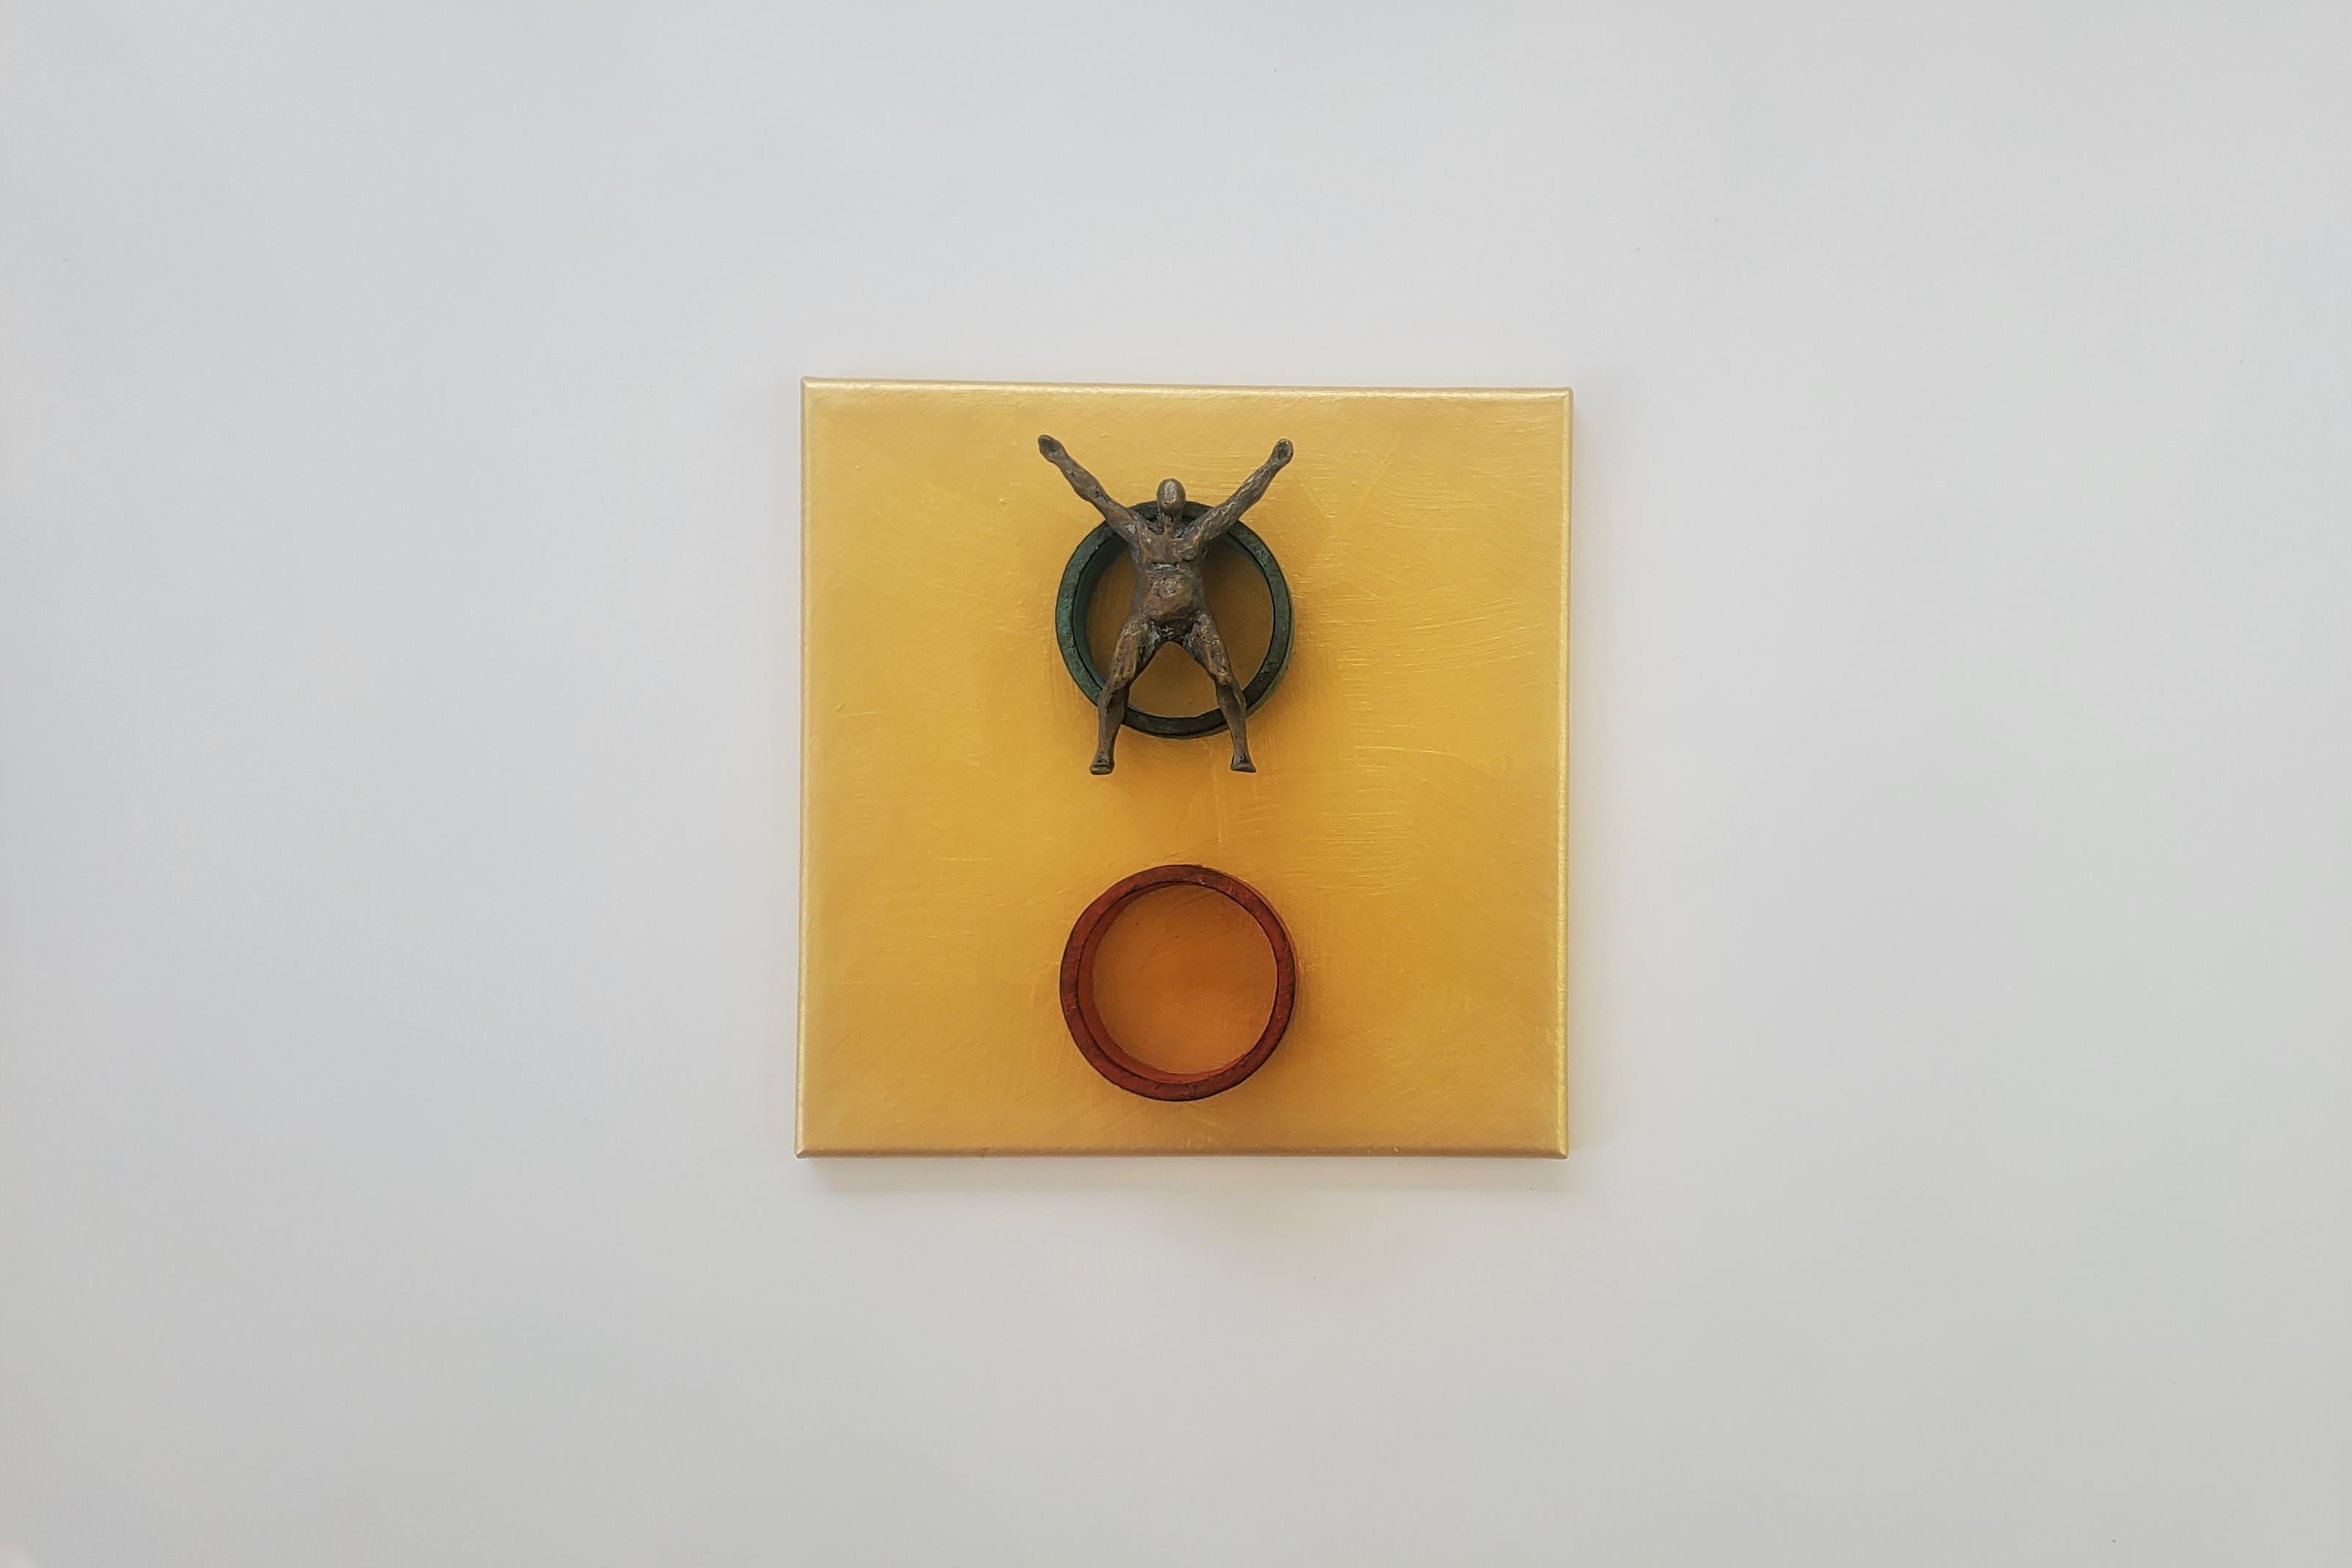 <p>Artist Comments<br>Inspired by minimalism, artist Yelitza Diaz presents a compelling piece featuring a bronze-colored figure on a blue circle. She creates a new discourse with geometric structures that allows her to identify even more with the